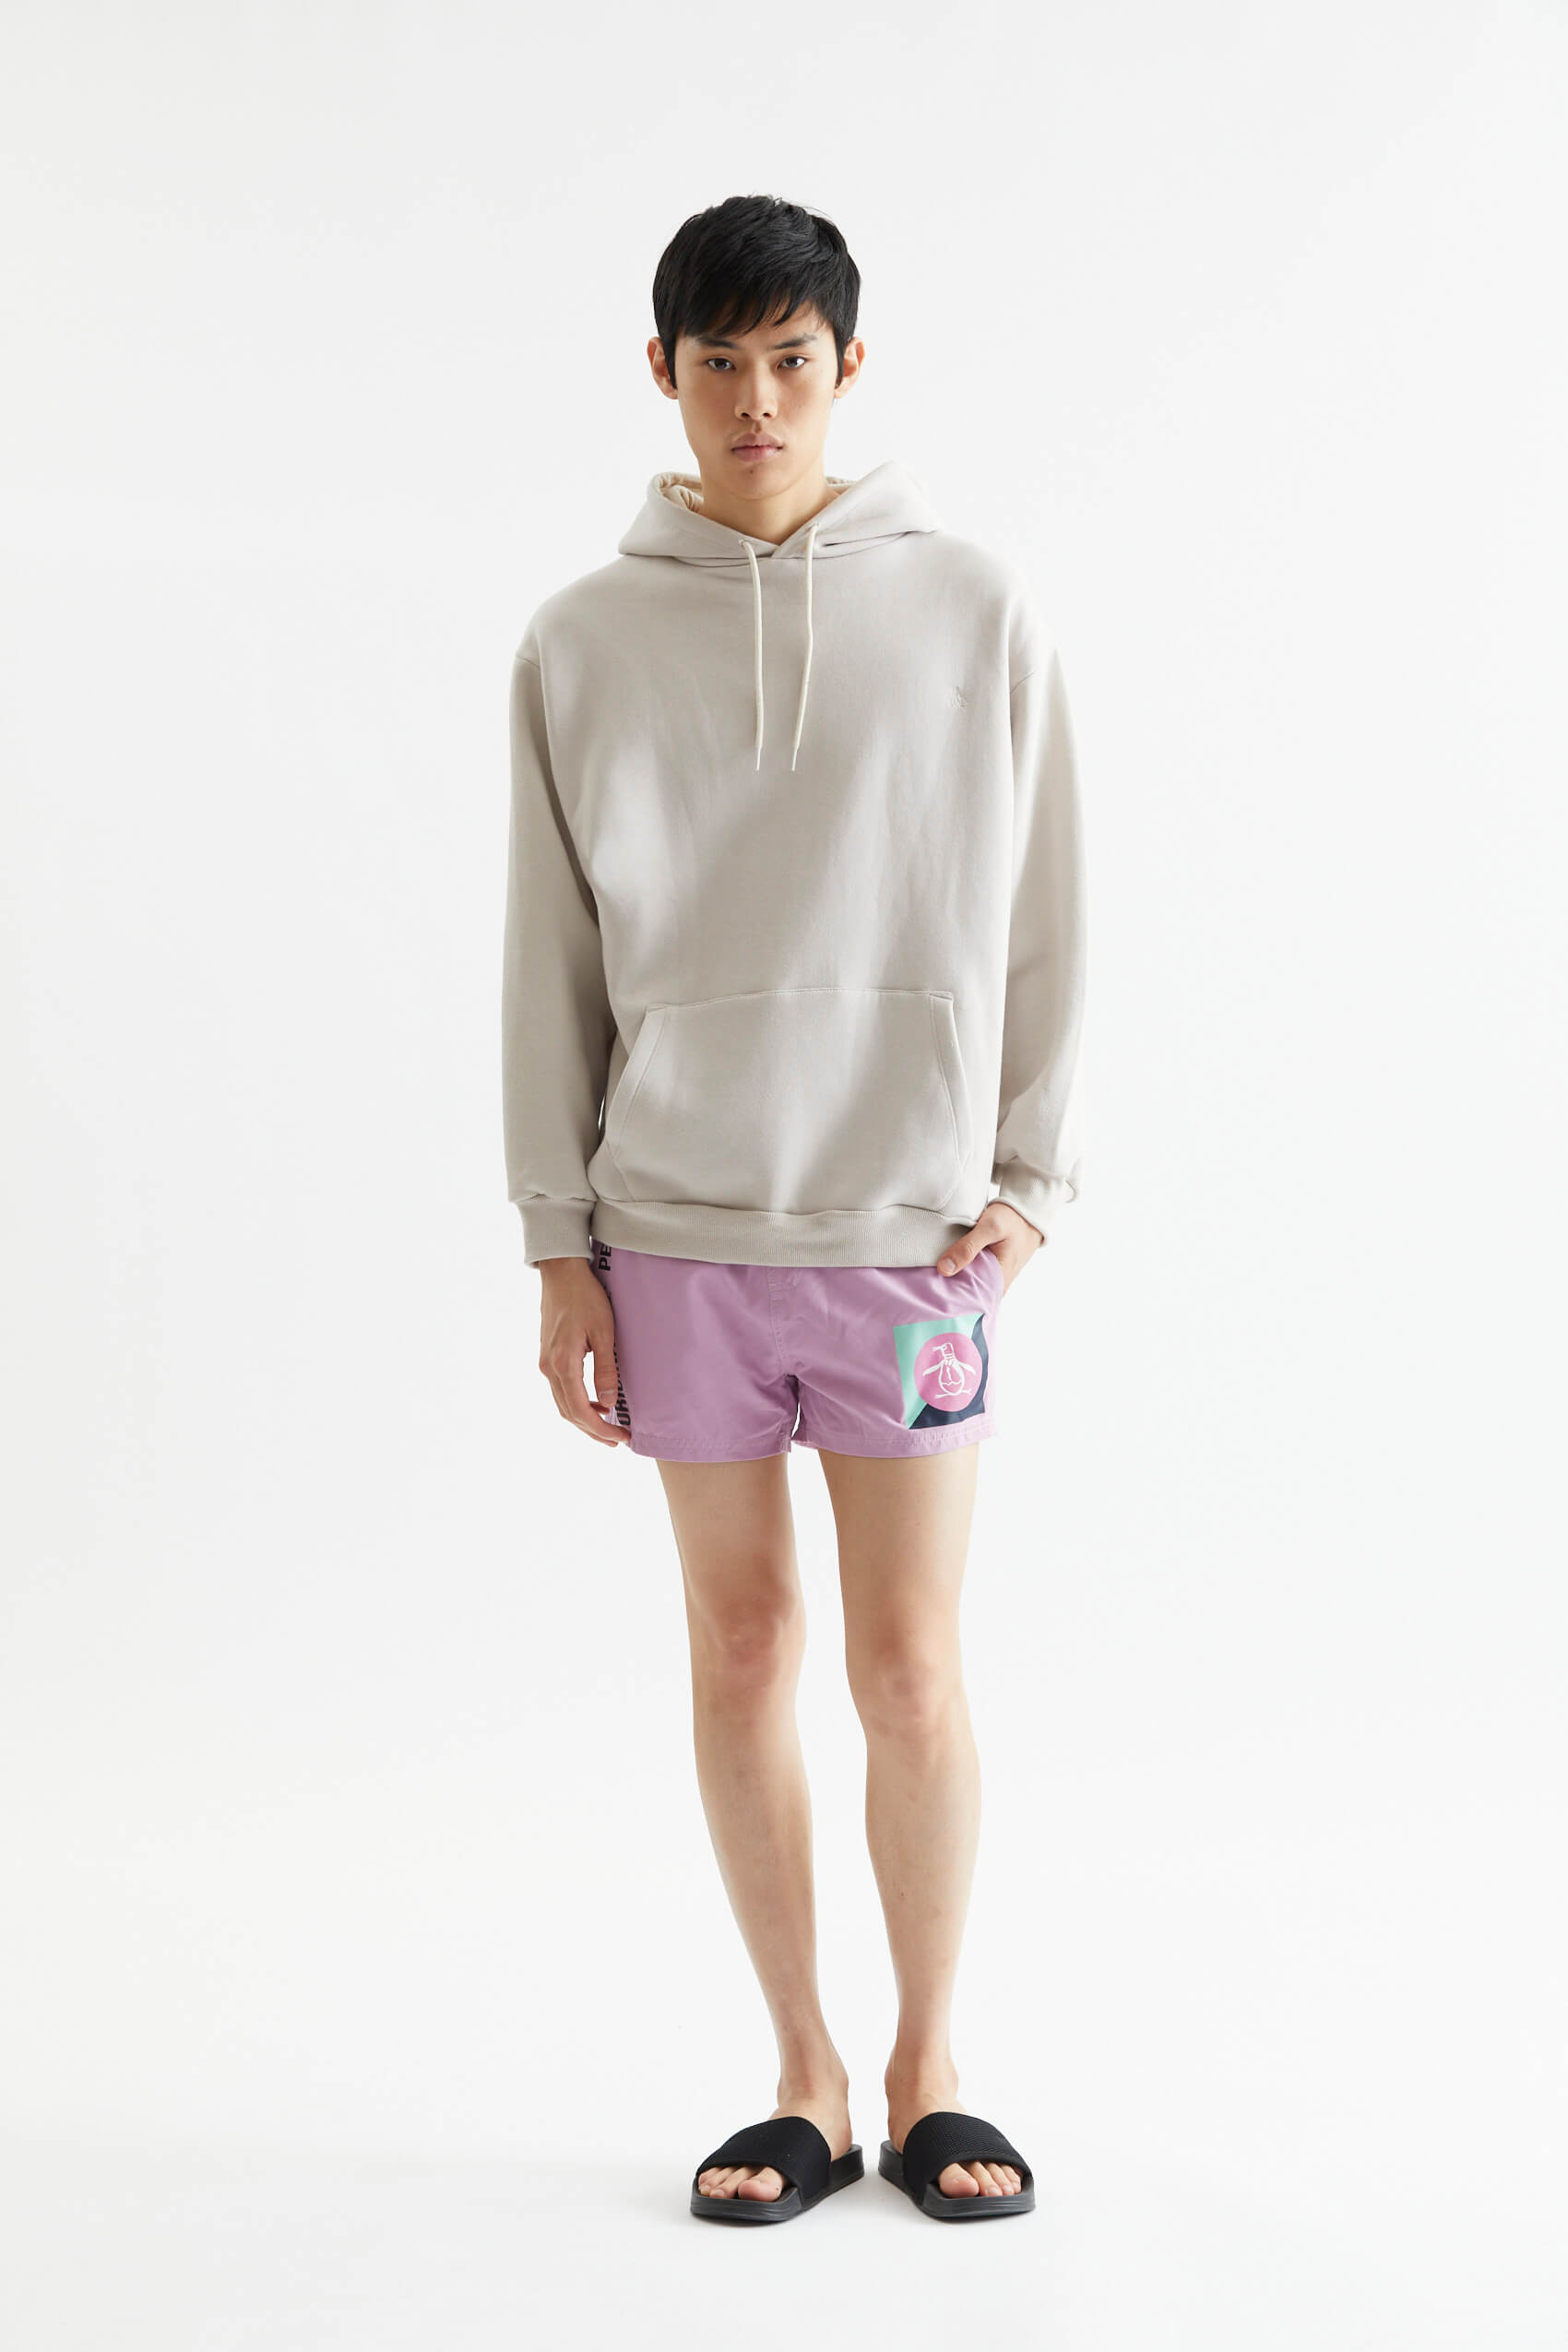 penguin_basic-oversize-hoodie_45-17-2024__picture-41788